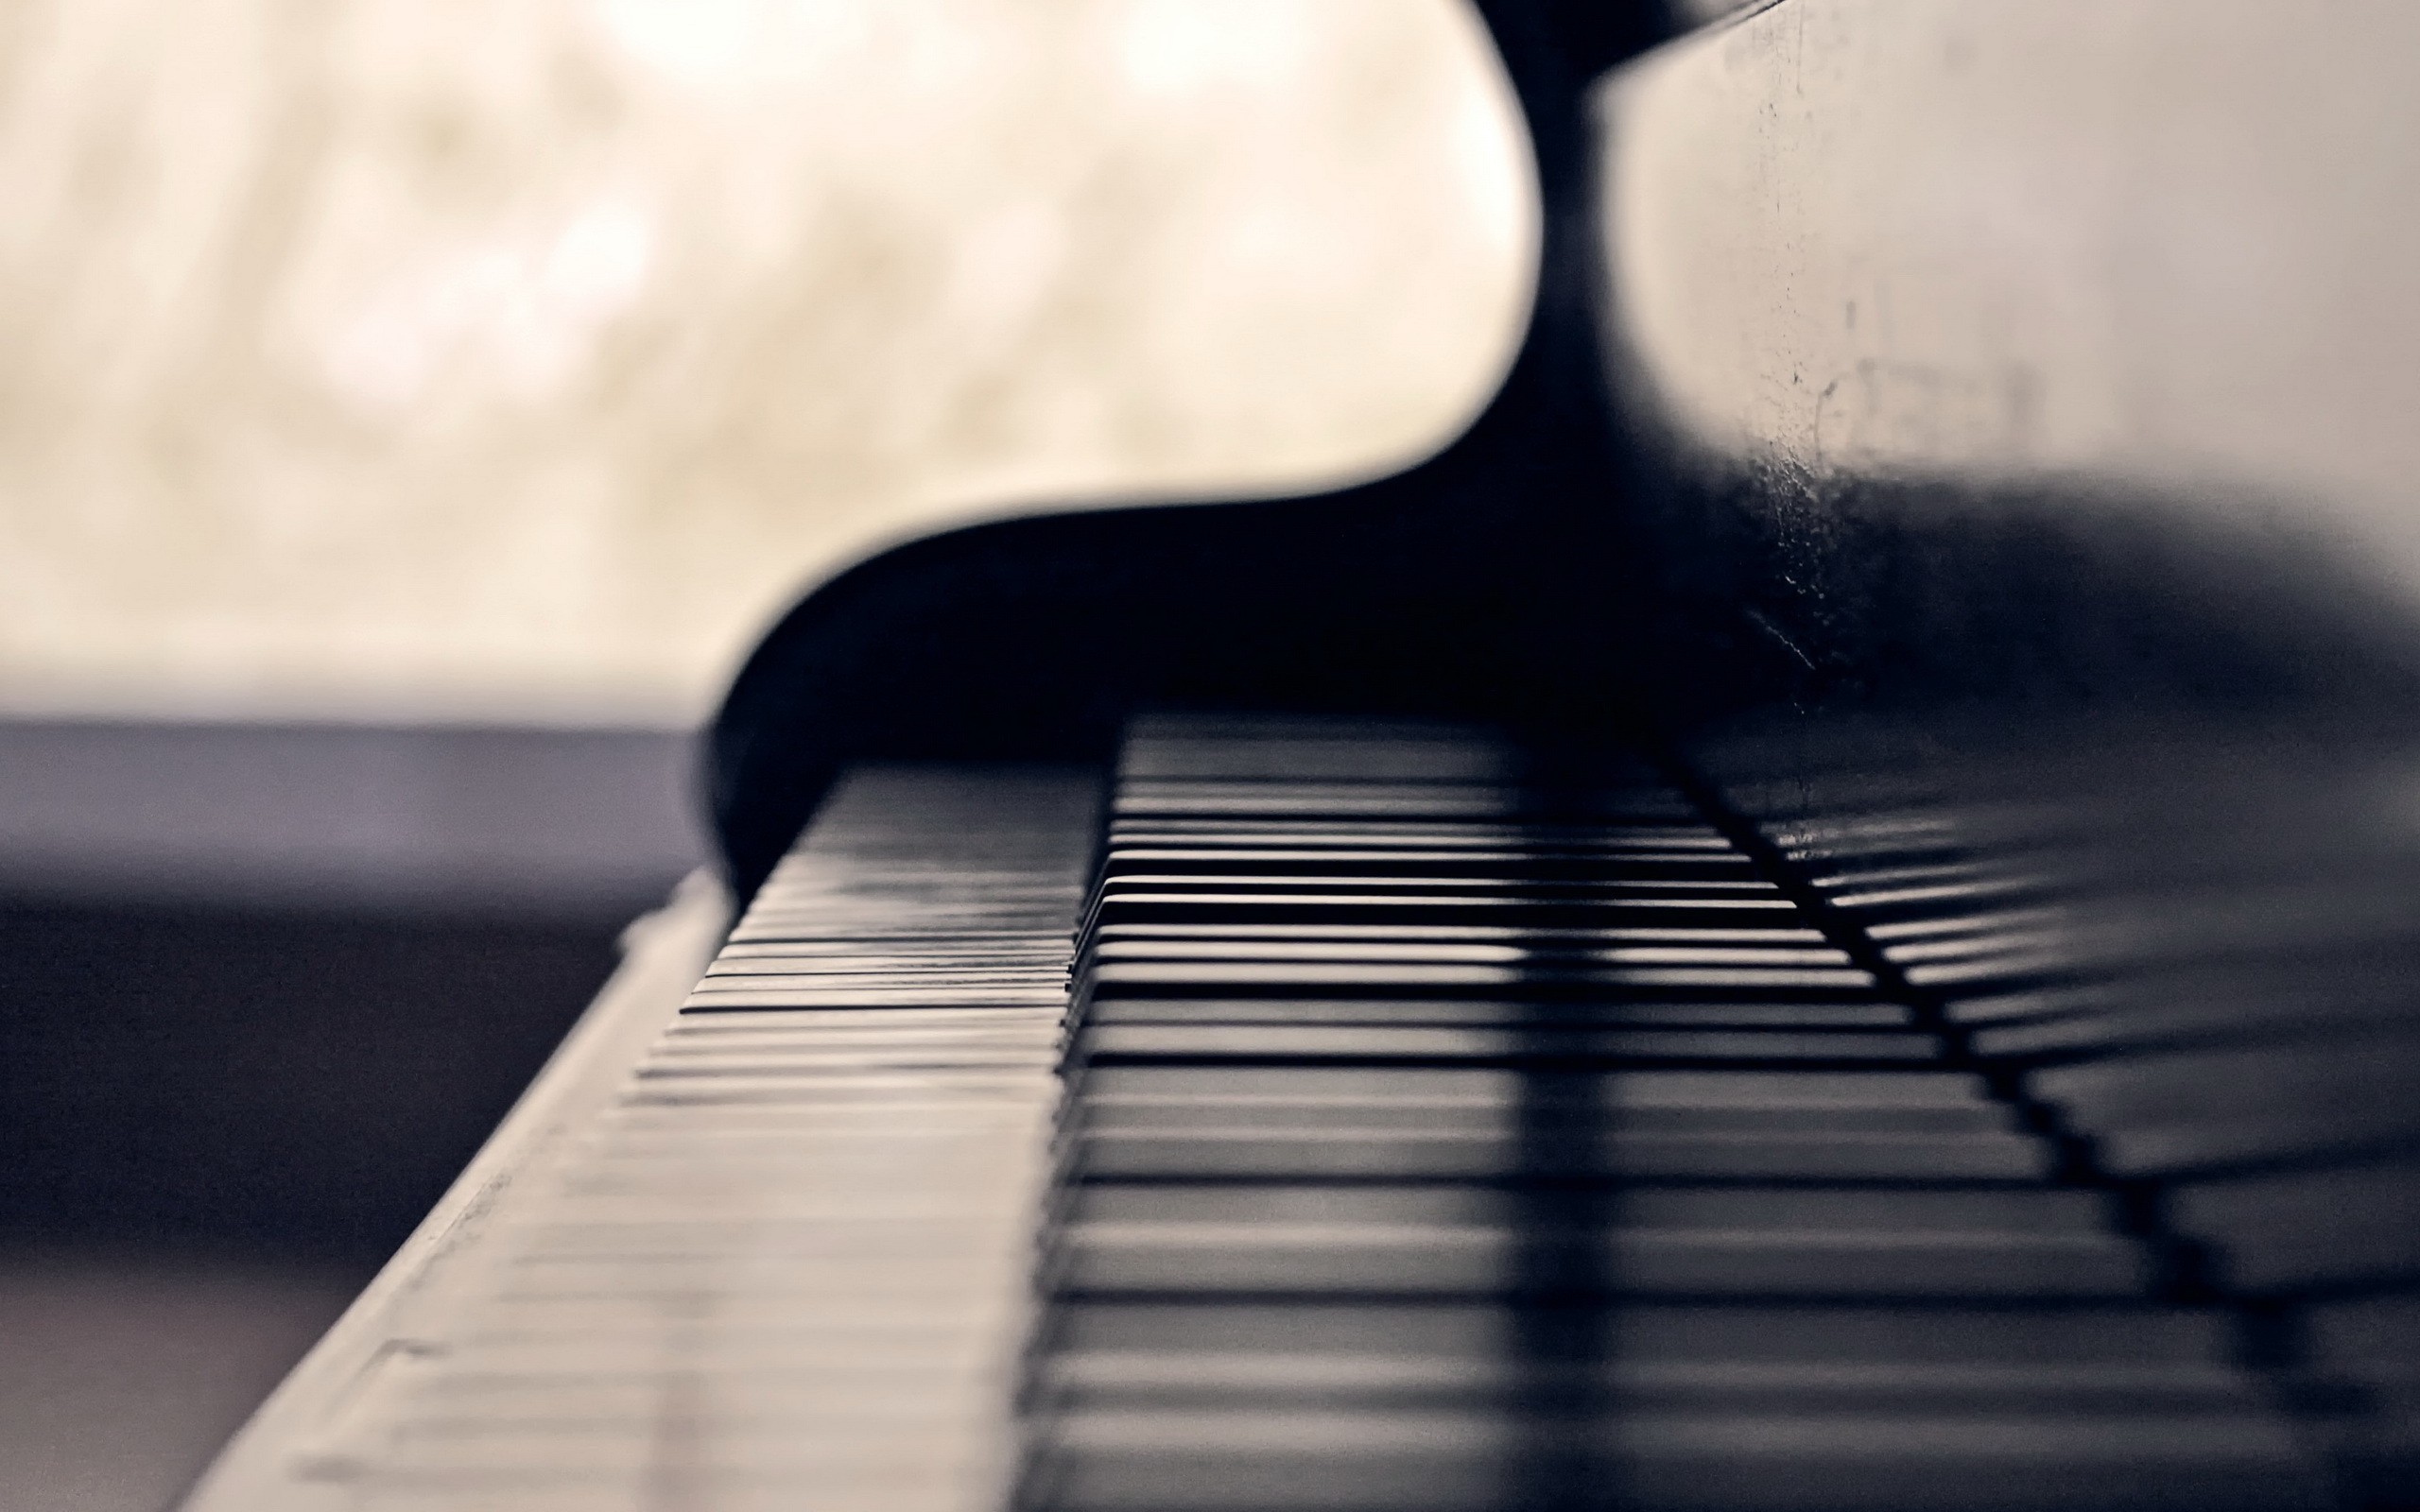 General 2560x1600 music piano musical instrument